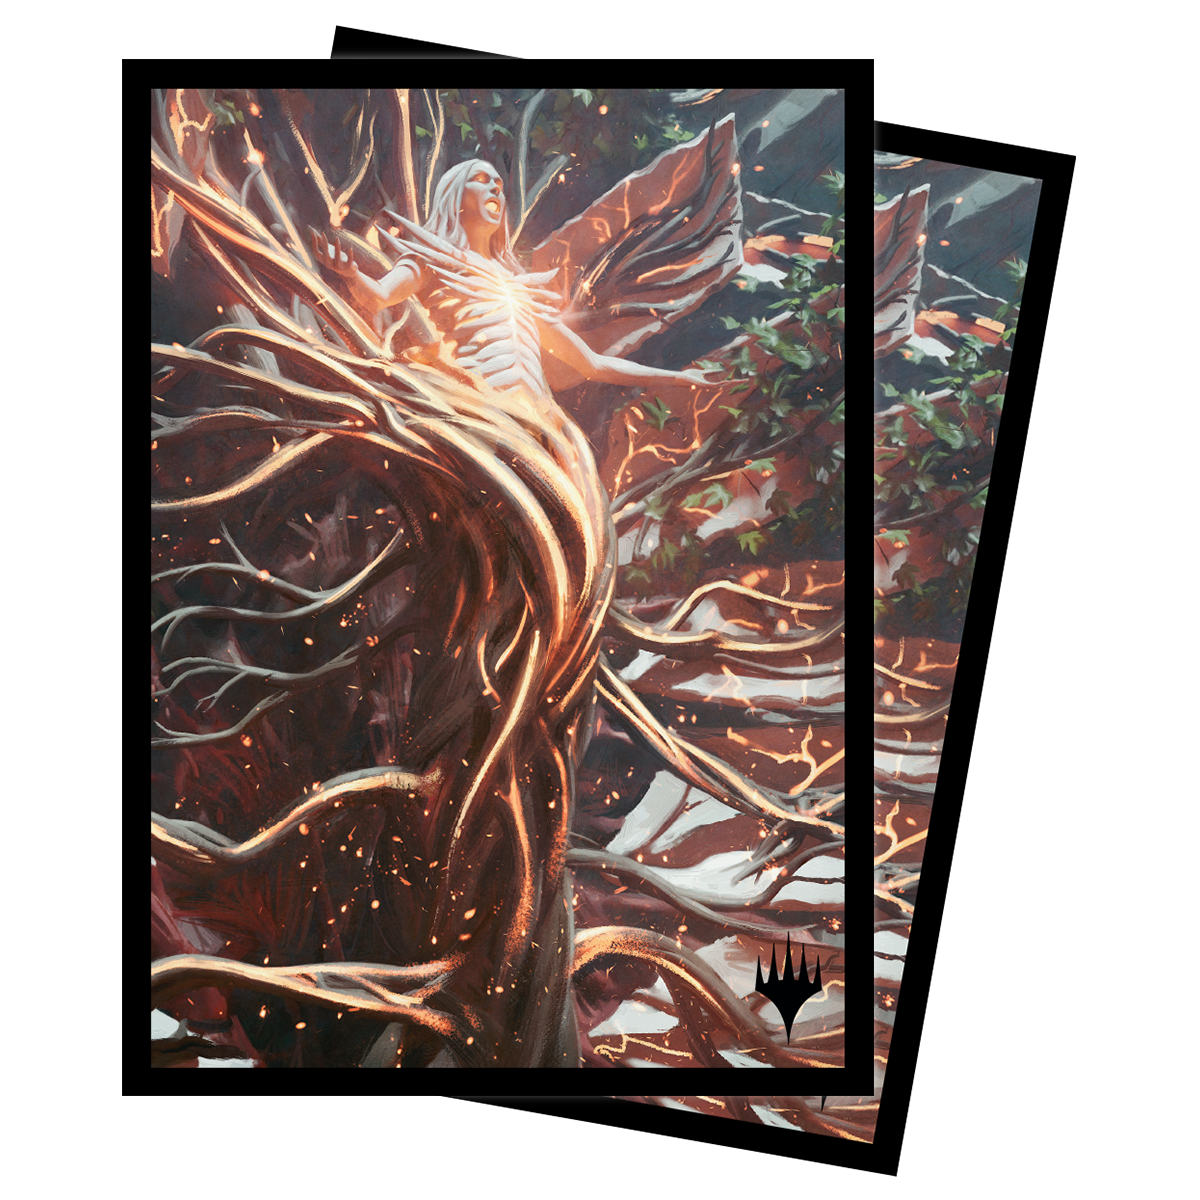 March of the Machine Wrenn and Realmbreaker Standard Deck Protector Sleeves (100ct) for Magic: The Gathering | Ultra PRO International